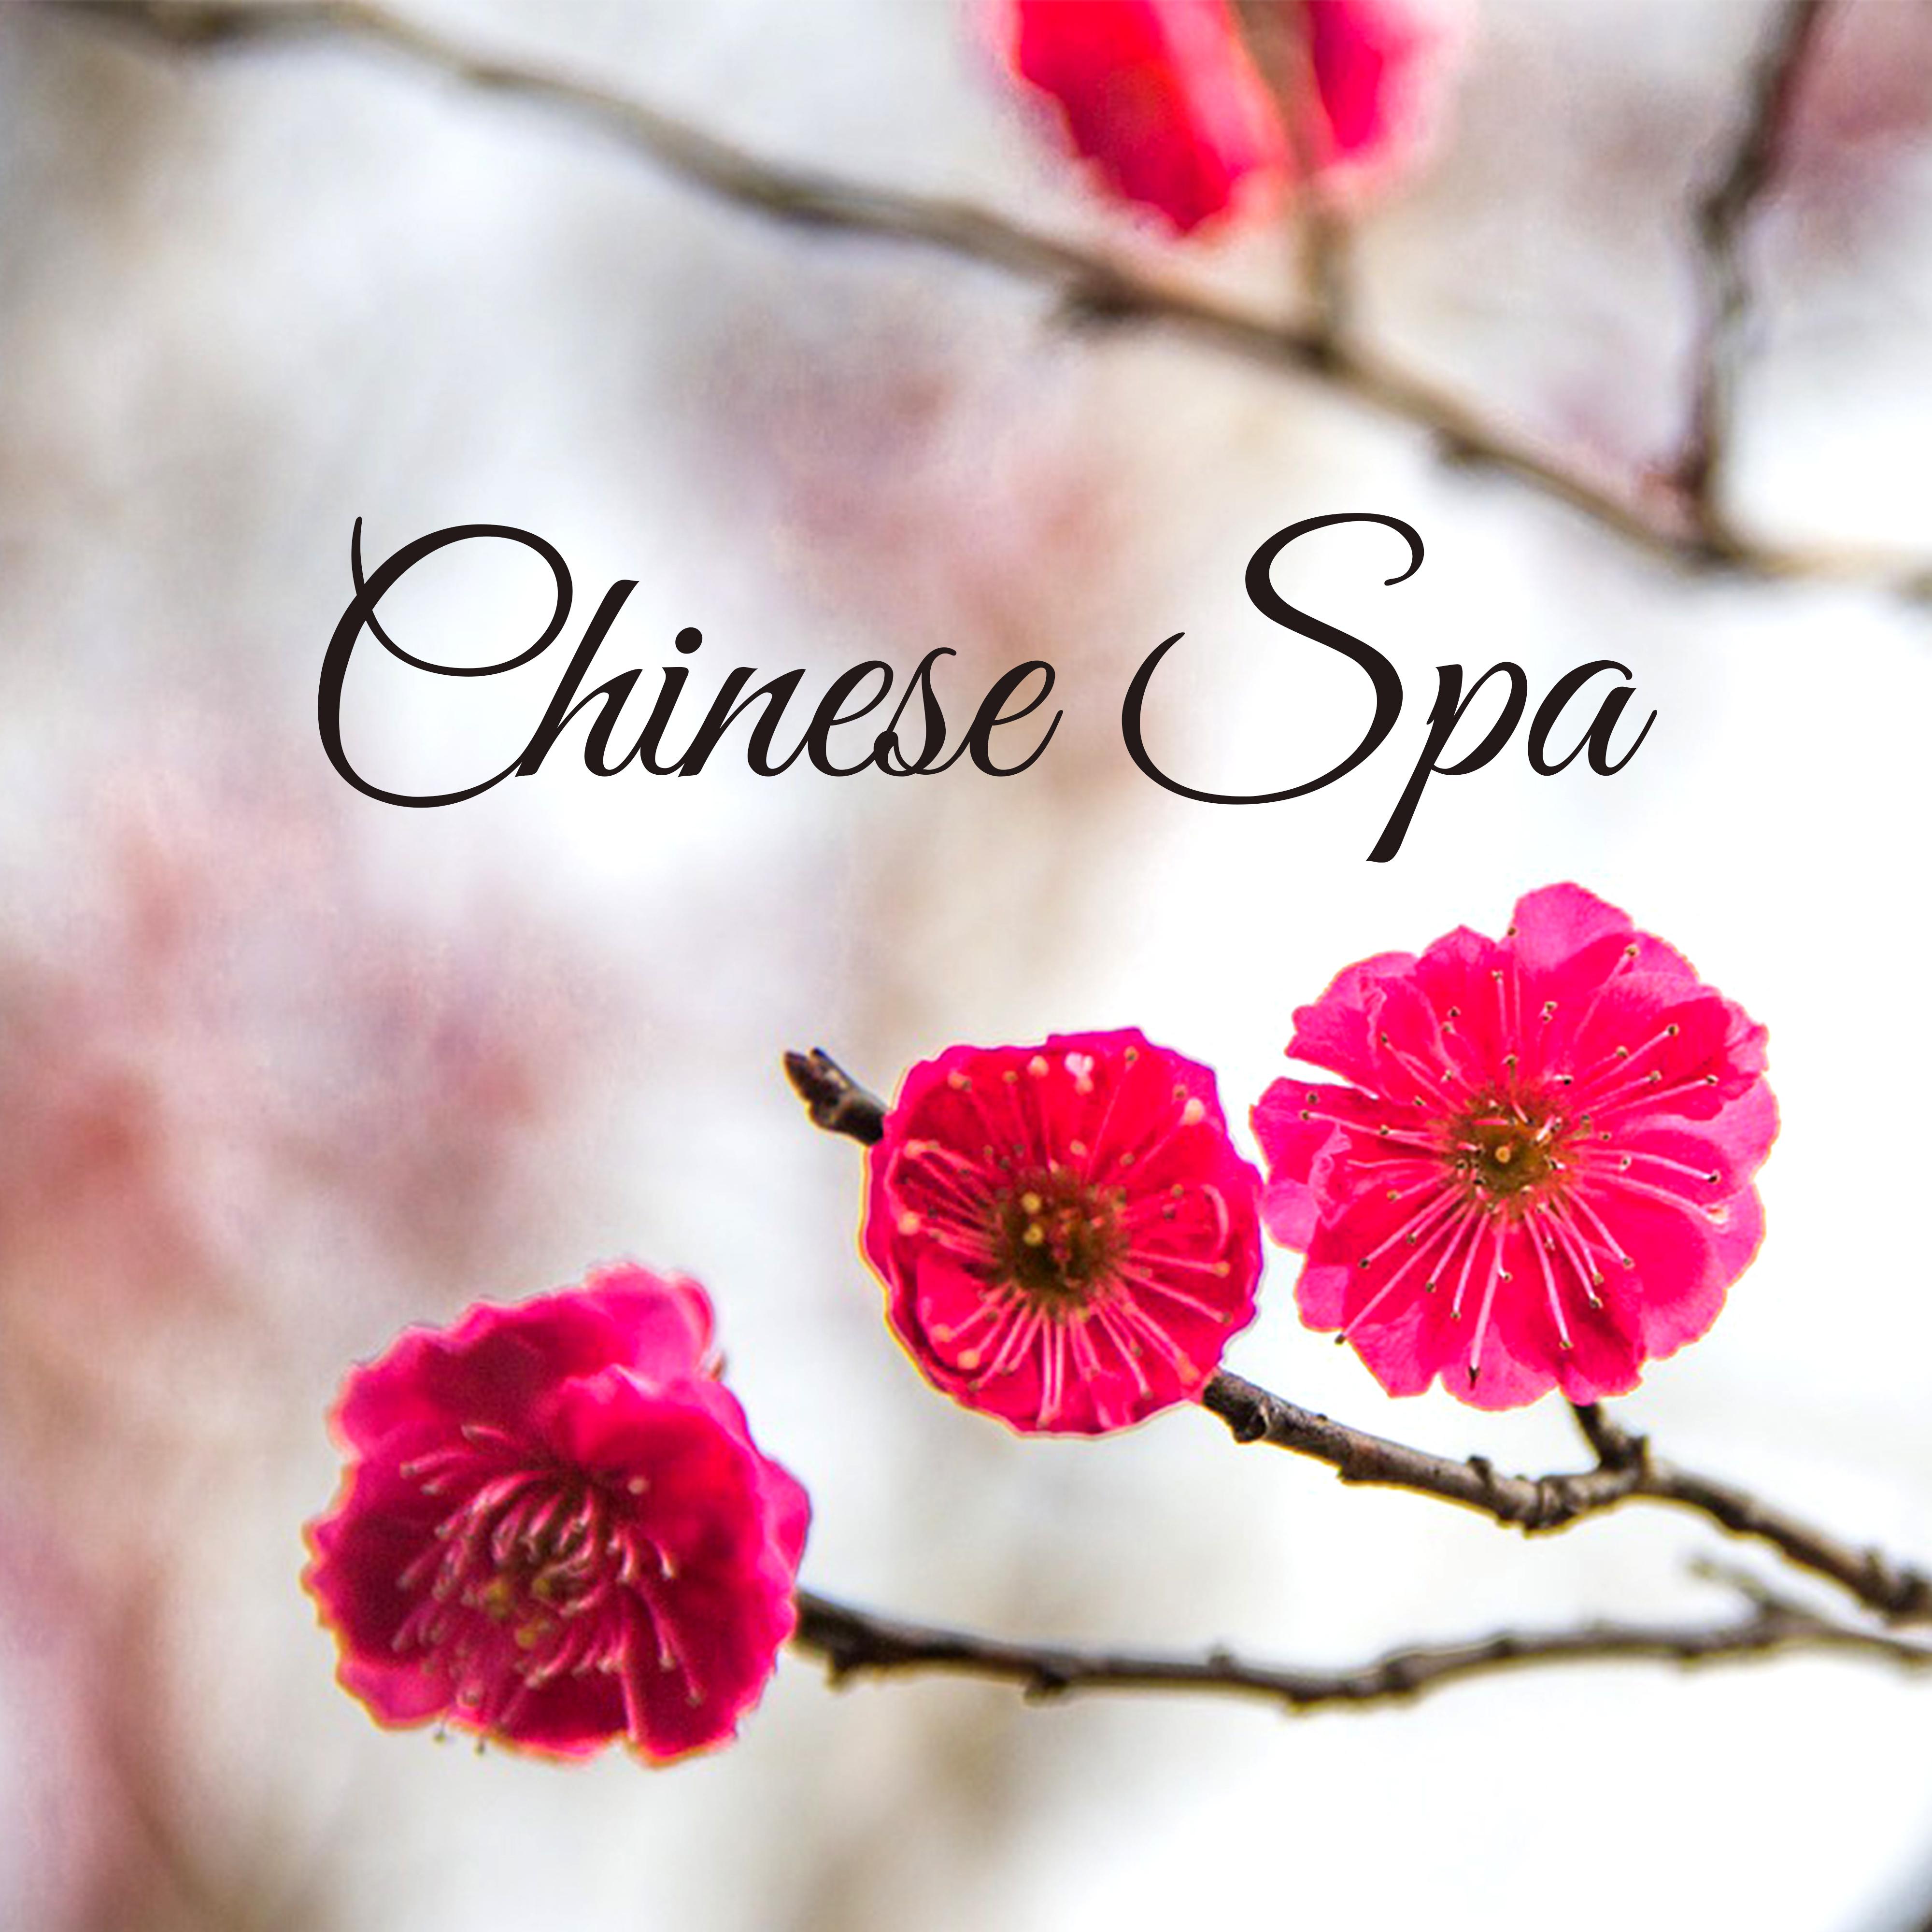 Chinese Spa – Asian Zen, Massage Therapy, Oriental Spa & Wellness, Stress Relief, Soothing Melodies